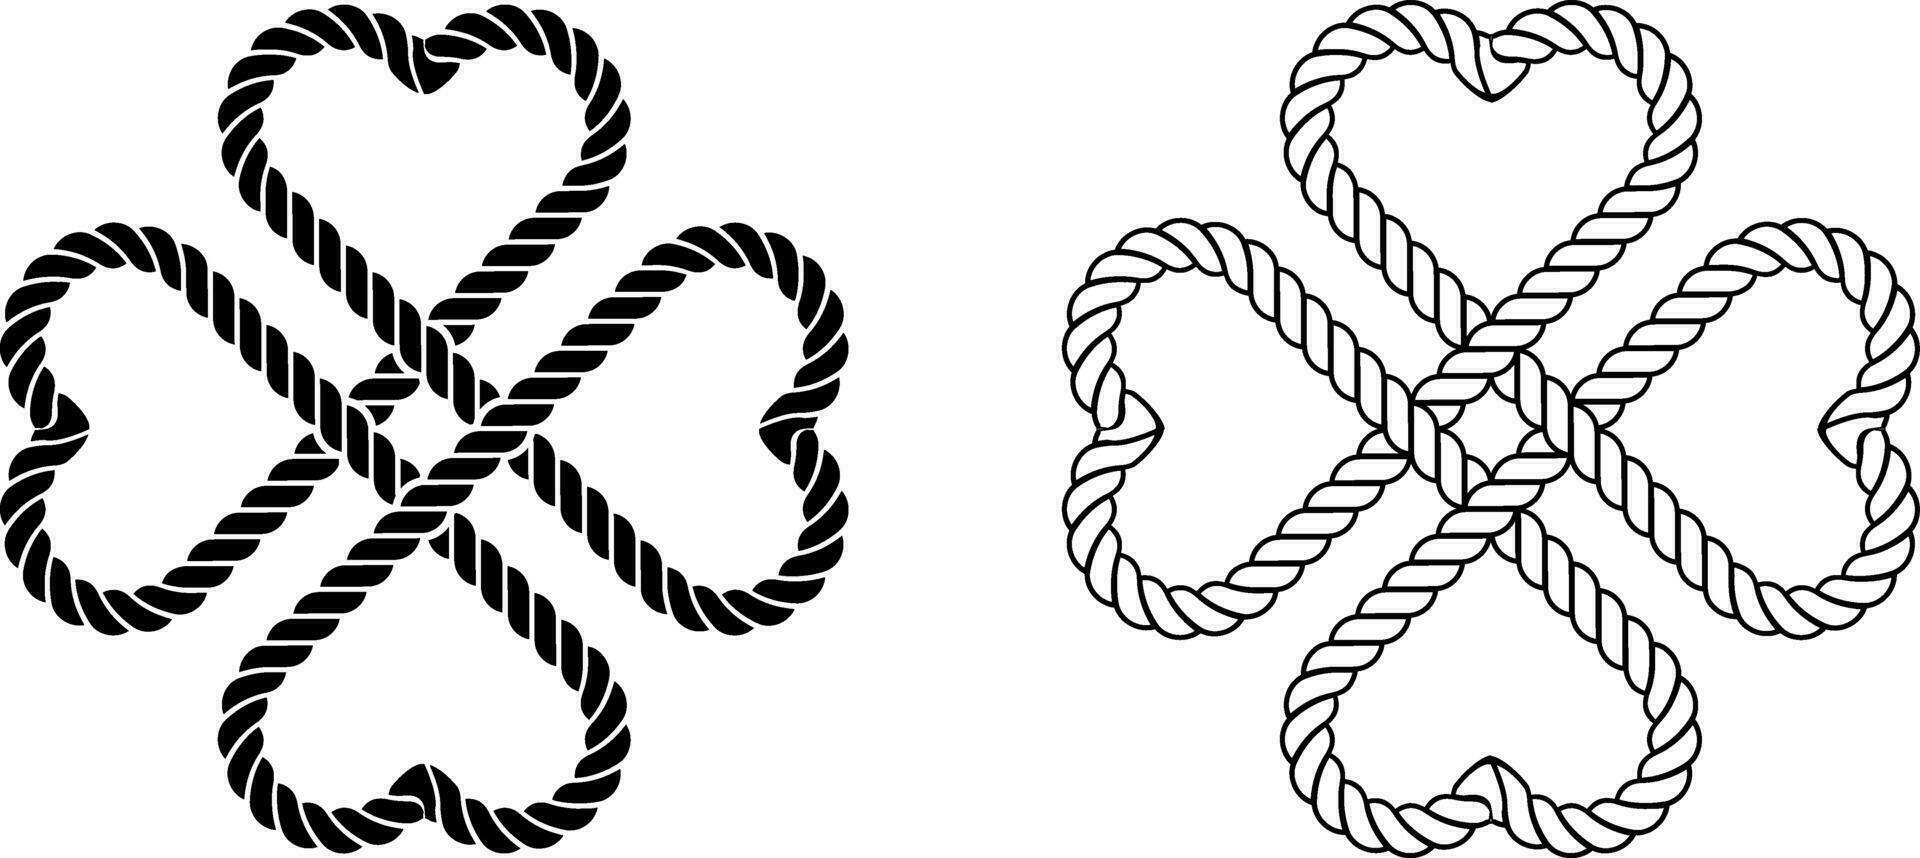 outline silhouette shamrock rope icon.clover leaf rope vector